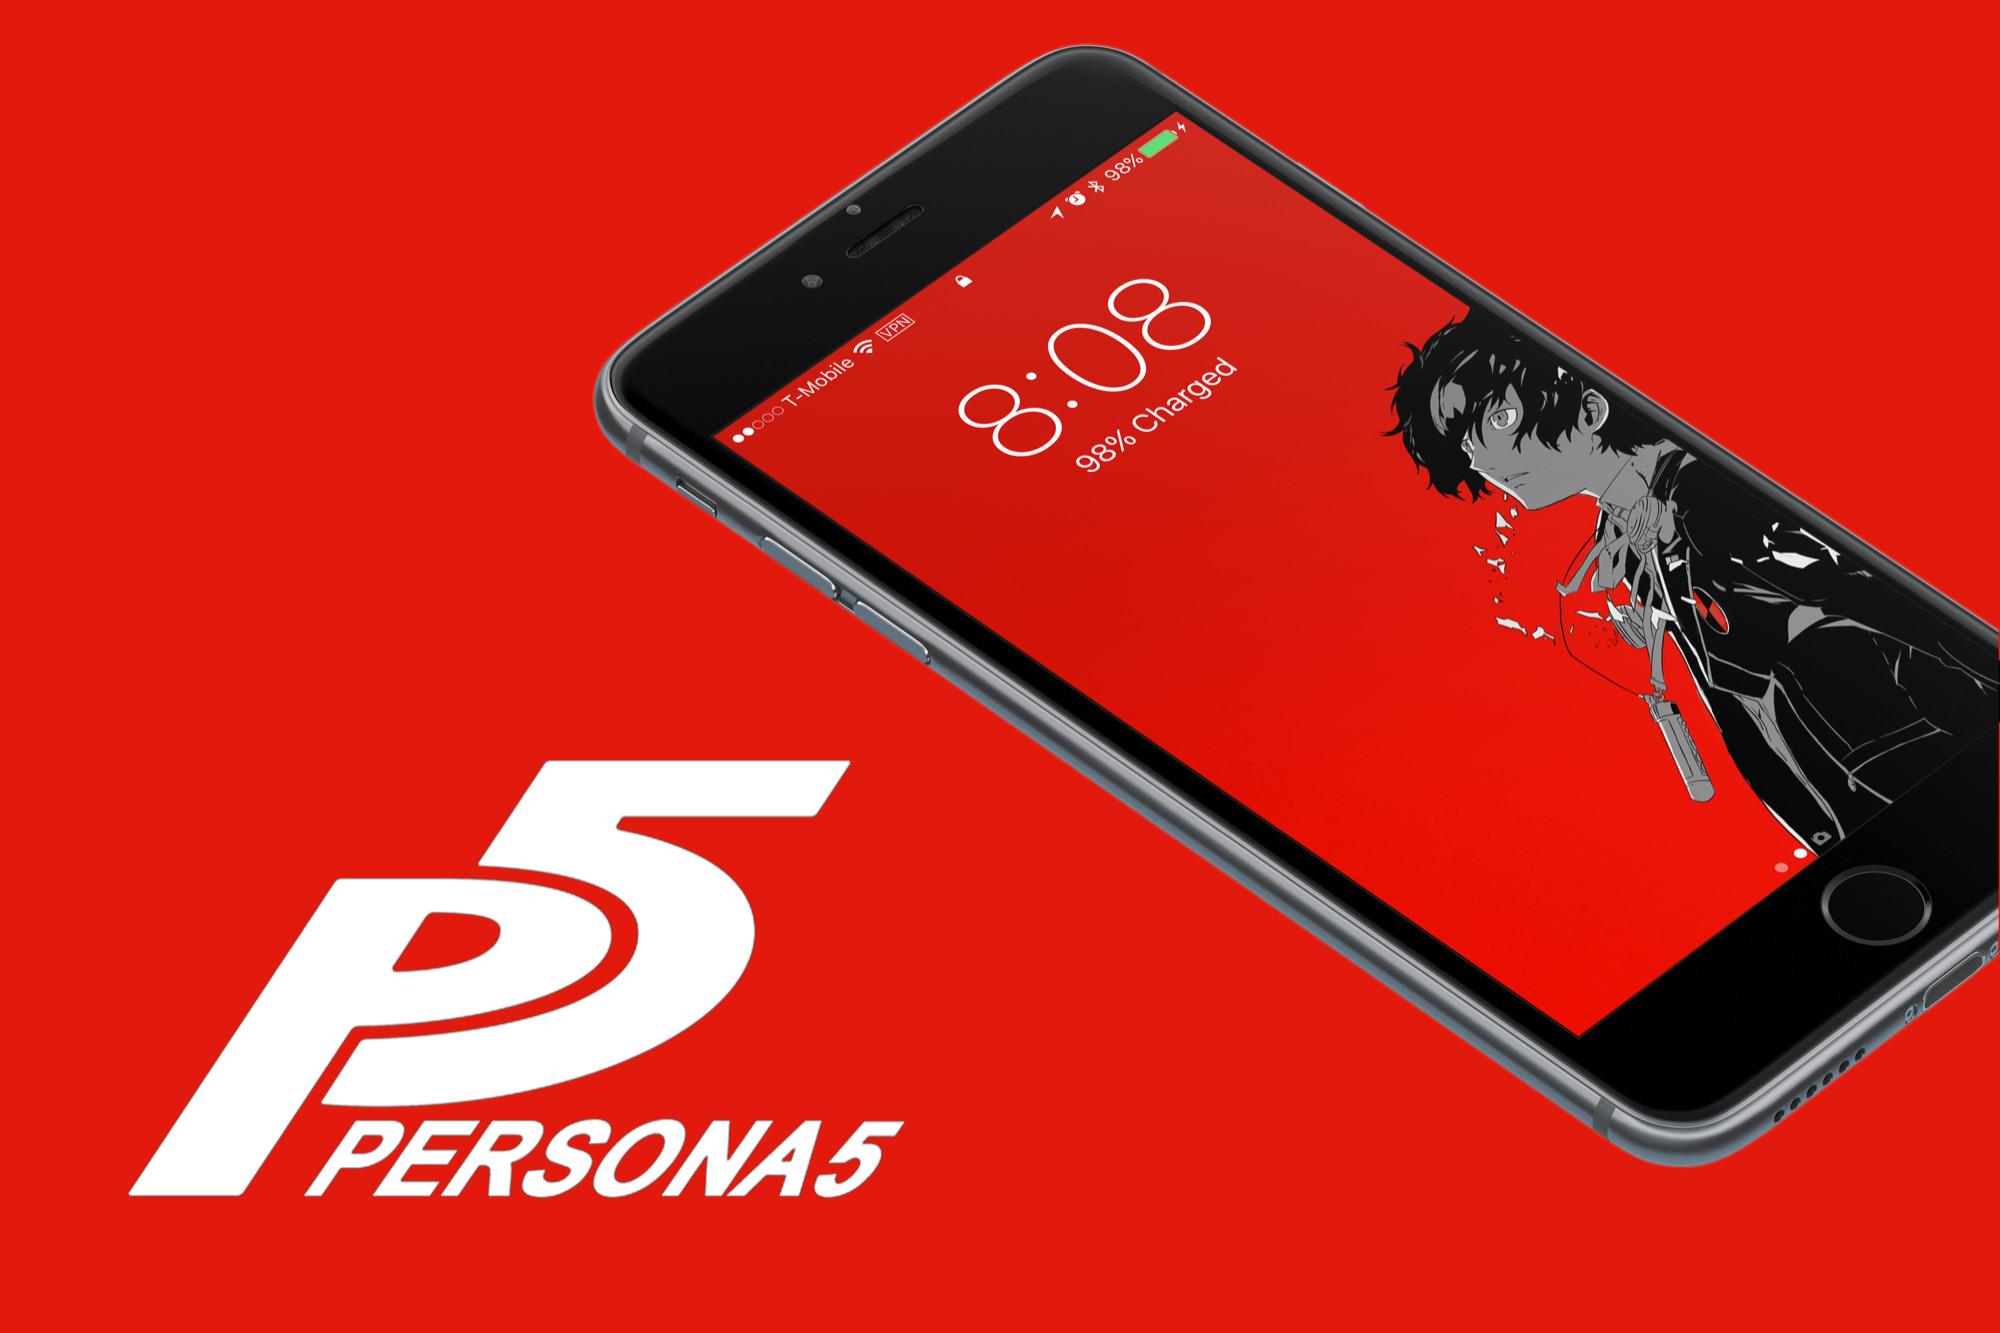 Persona 5 was released last week and its a truly marvelous game thats oozing with style. As I tend to do, I made a wallpaper for my phone to bring a